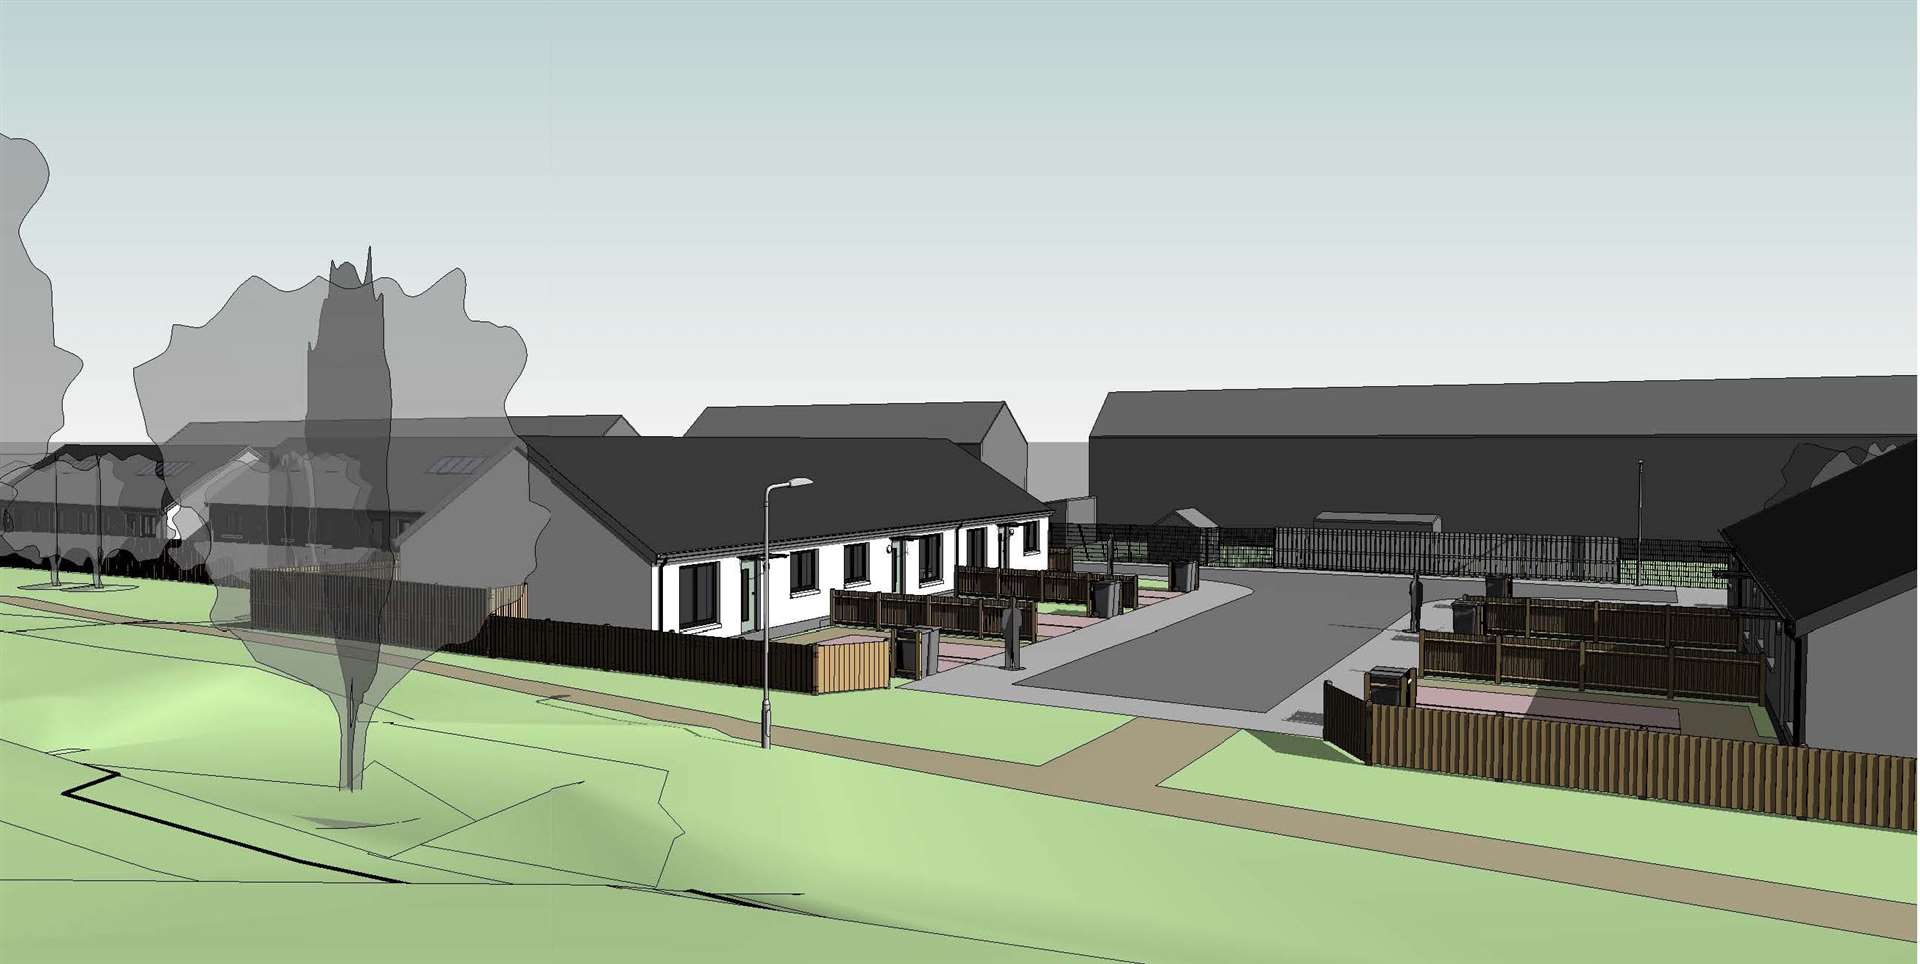 An impression of the proposed bungalows at Dalneigh as they would be seen from the canal tow path.